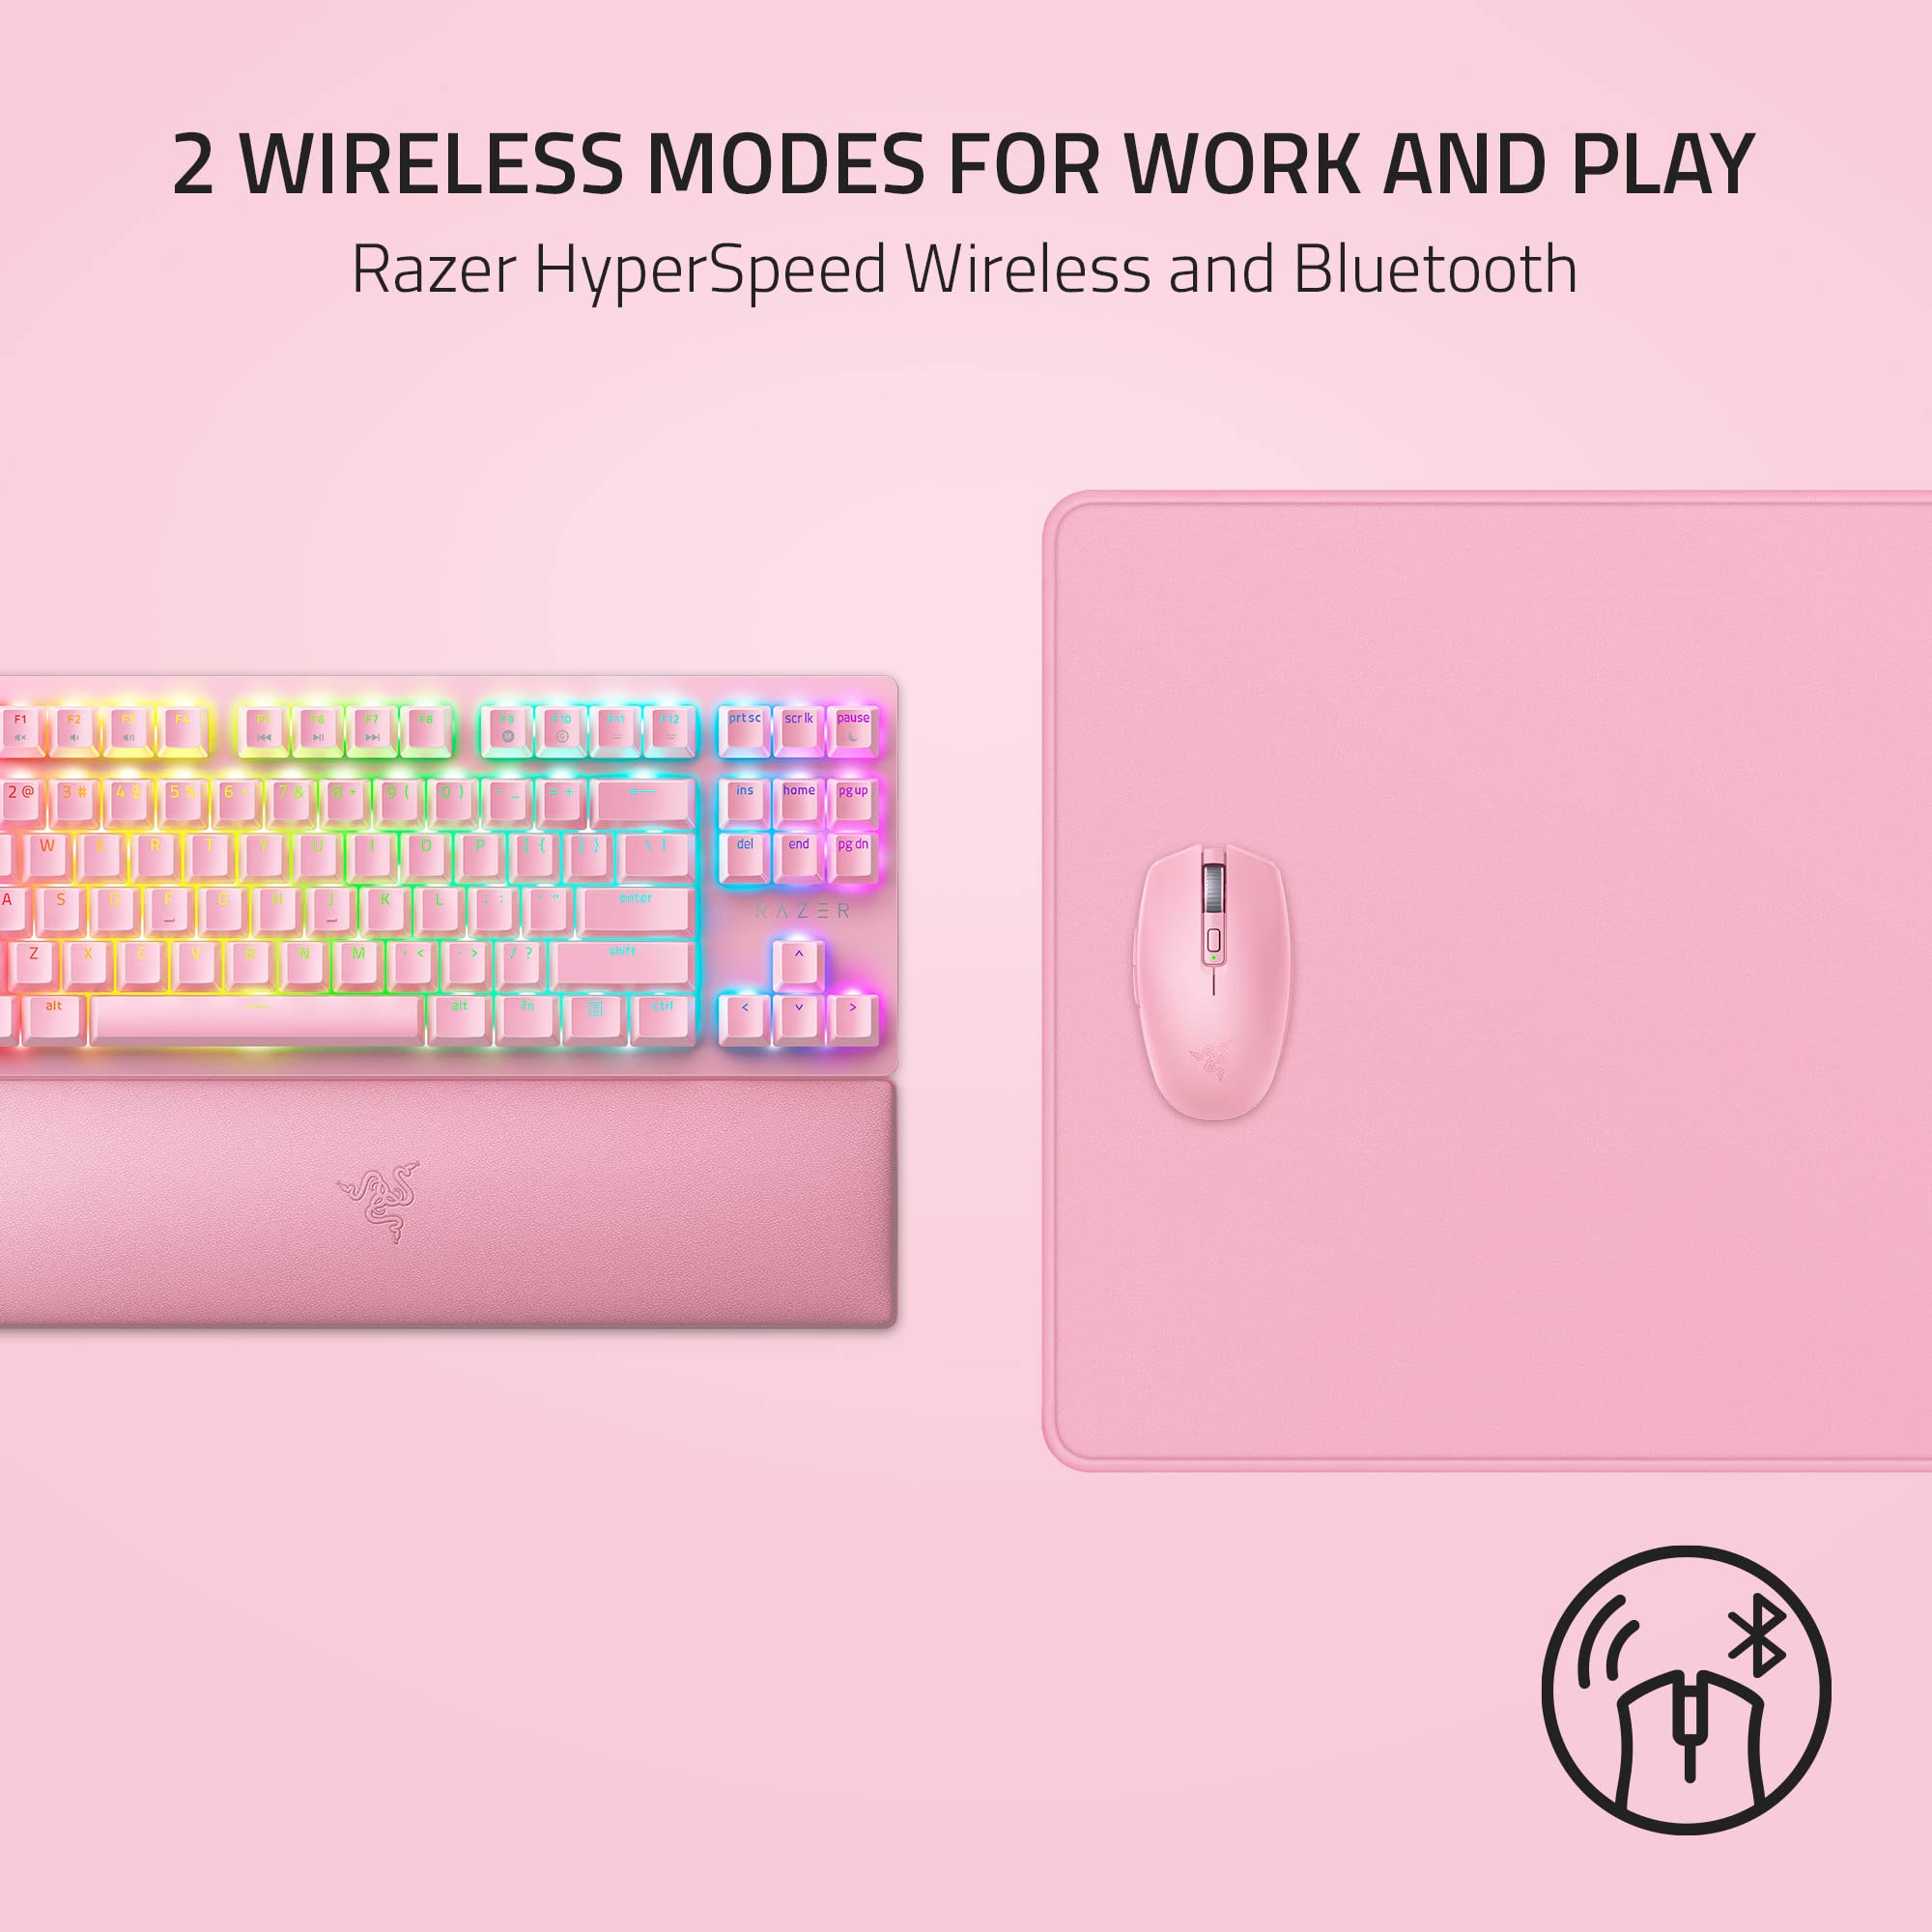 Razer Orochi V2 Mobile Wireless Gaming Mouse: Ultra Lightweight - 2 Wireless Modes - Up to 950 Hr Battery Life - Mechanical Mouse Switches - 5G Advanced 18K DPI Optical Sensor - Quartz Pink